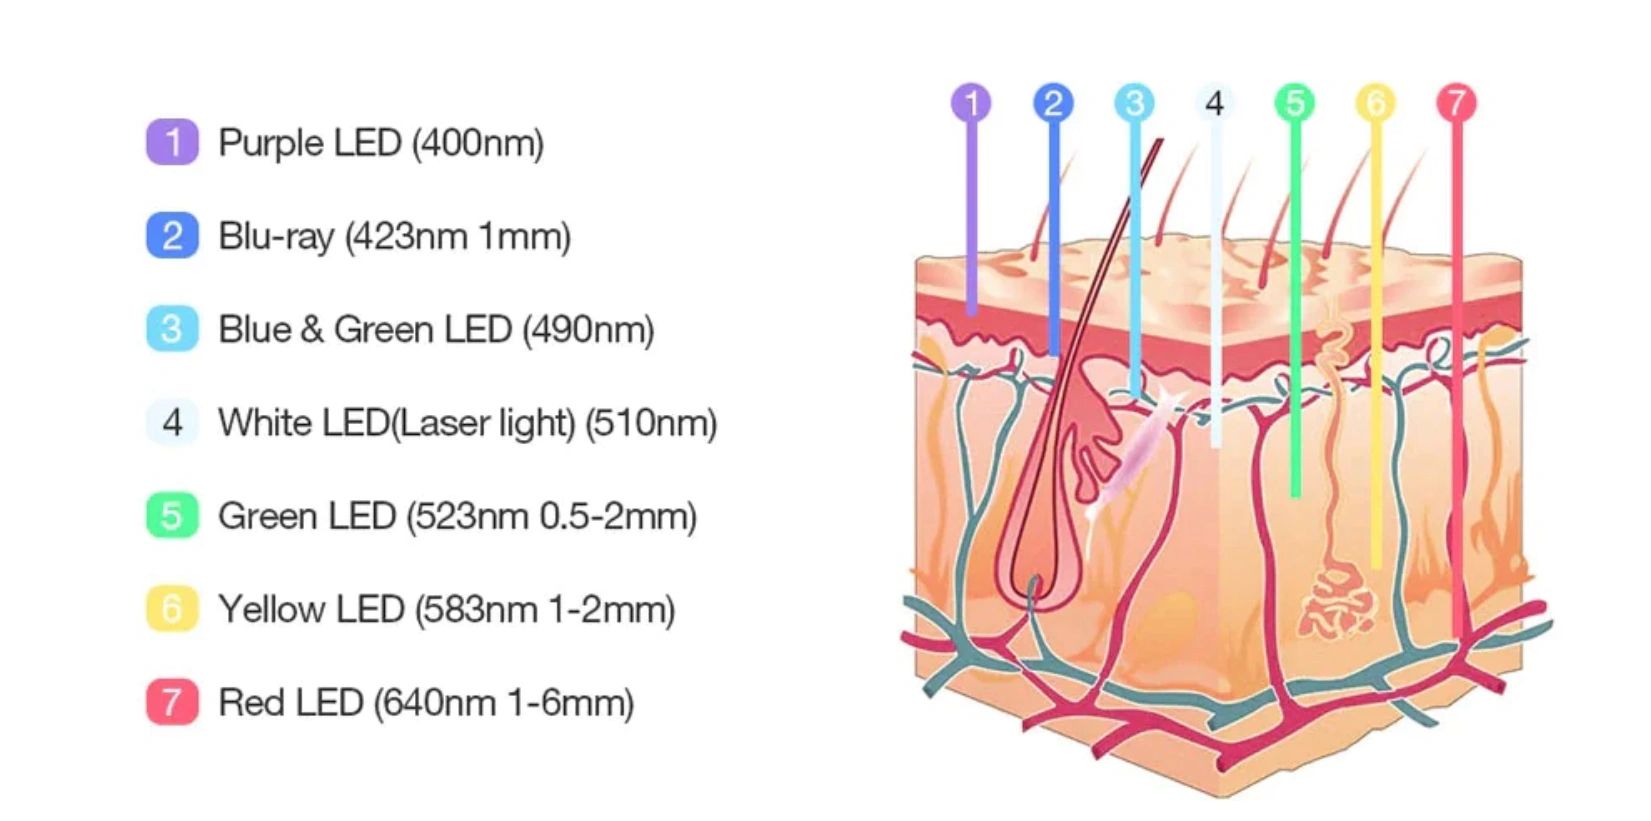 PDT (Photodynamic Therapy) or LED (Light Emitting Diode) Therapy.